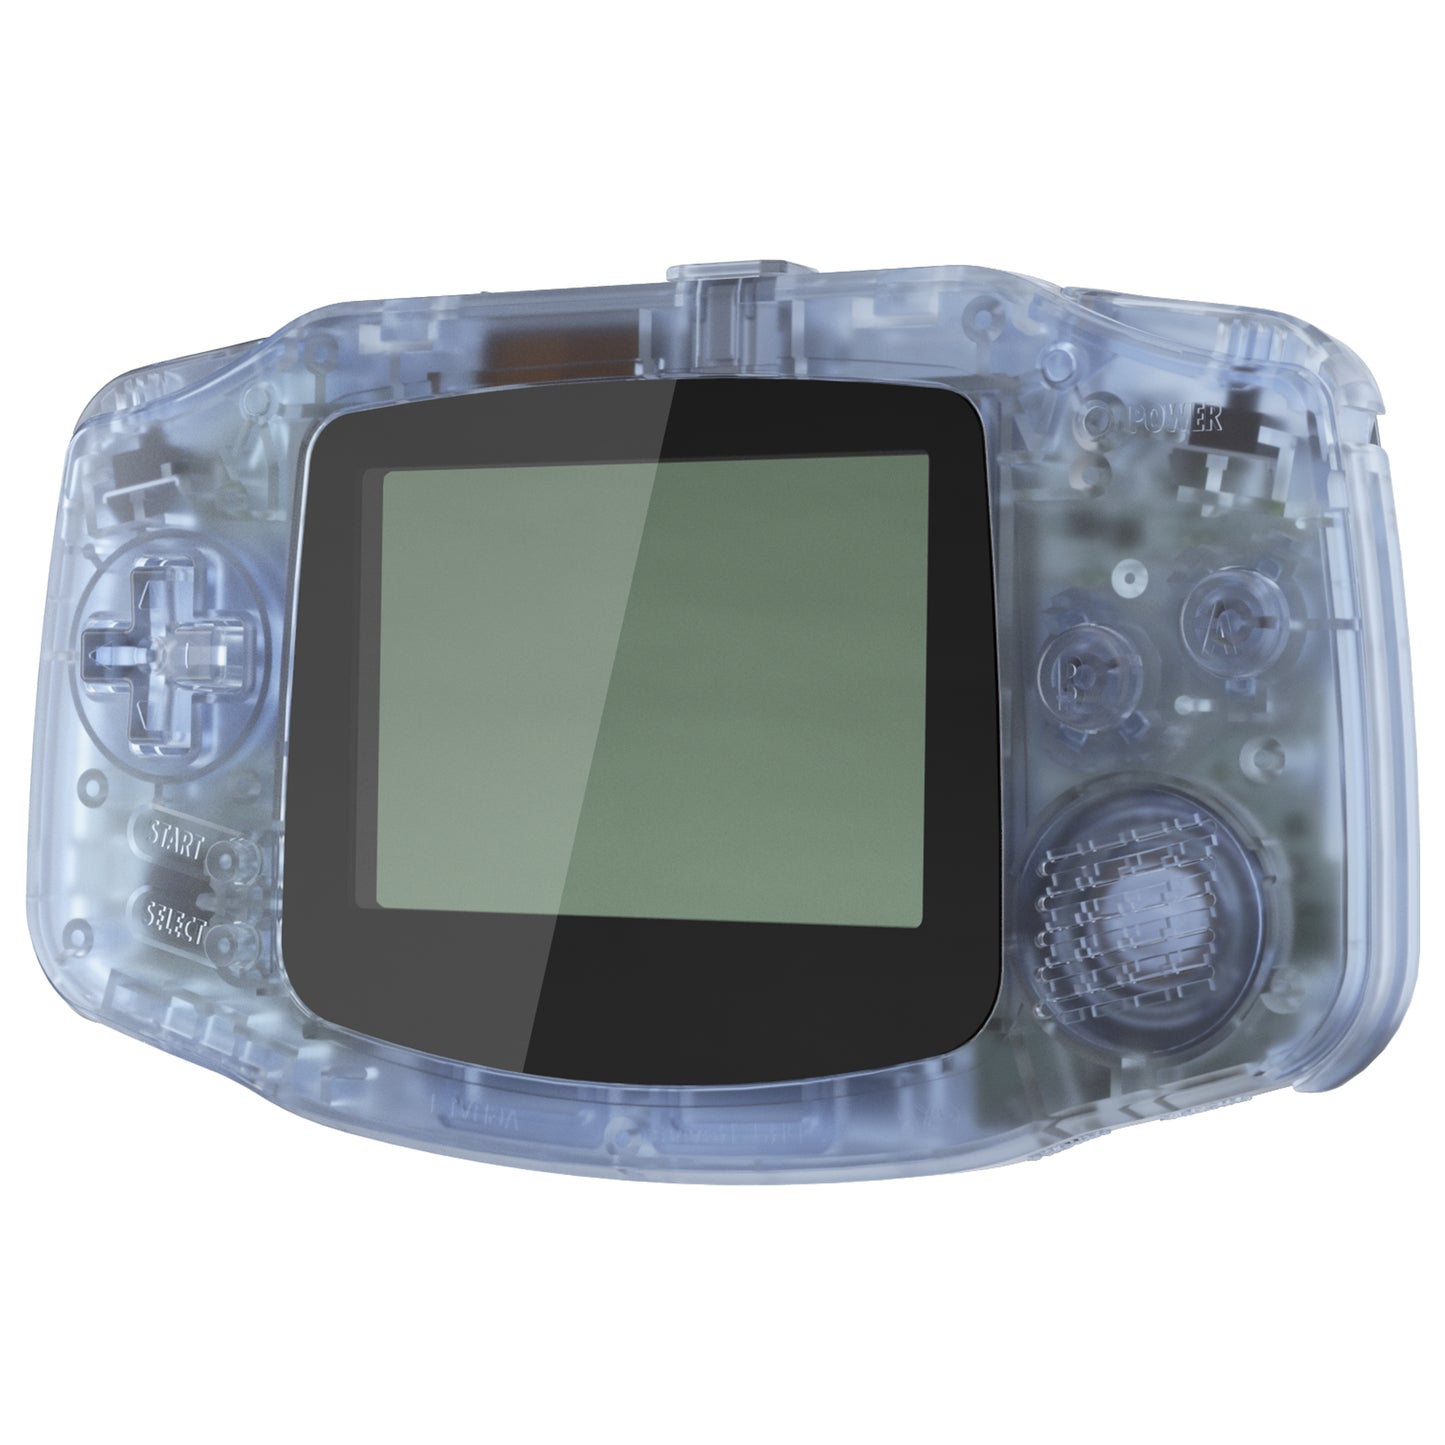 eXtremeRate Retail IPS Ready Upgraded eXtremeRate Glacier Blue Replacement Shell Full Housing Cover & Black Screen Lens for Gameboy Advance – Compatible with Both IPS & Standard LCD – Console & IPS Screen NOT Included - TAGM5006B